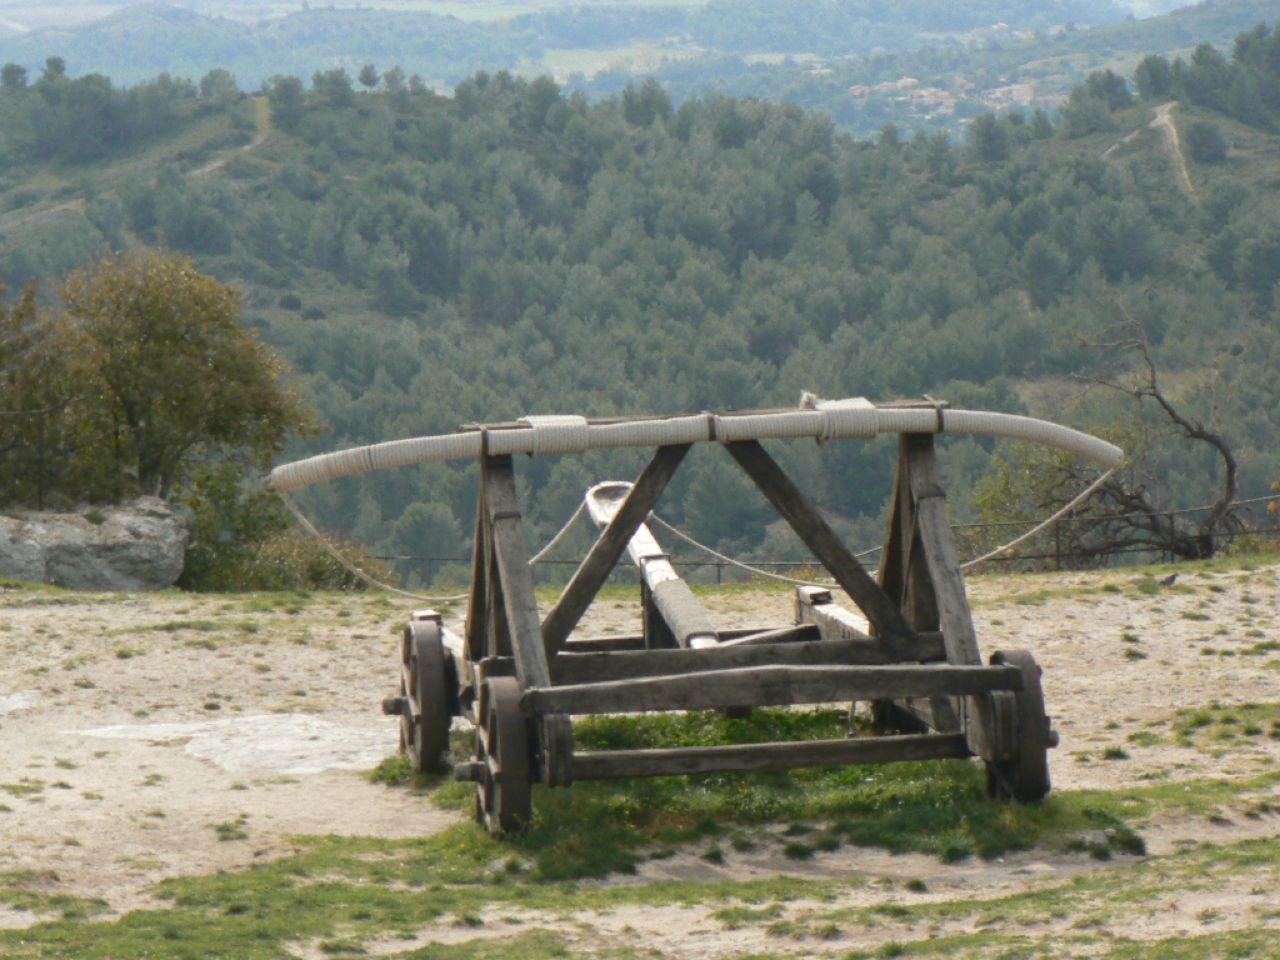 midieval catapault on a modern day tank chasis